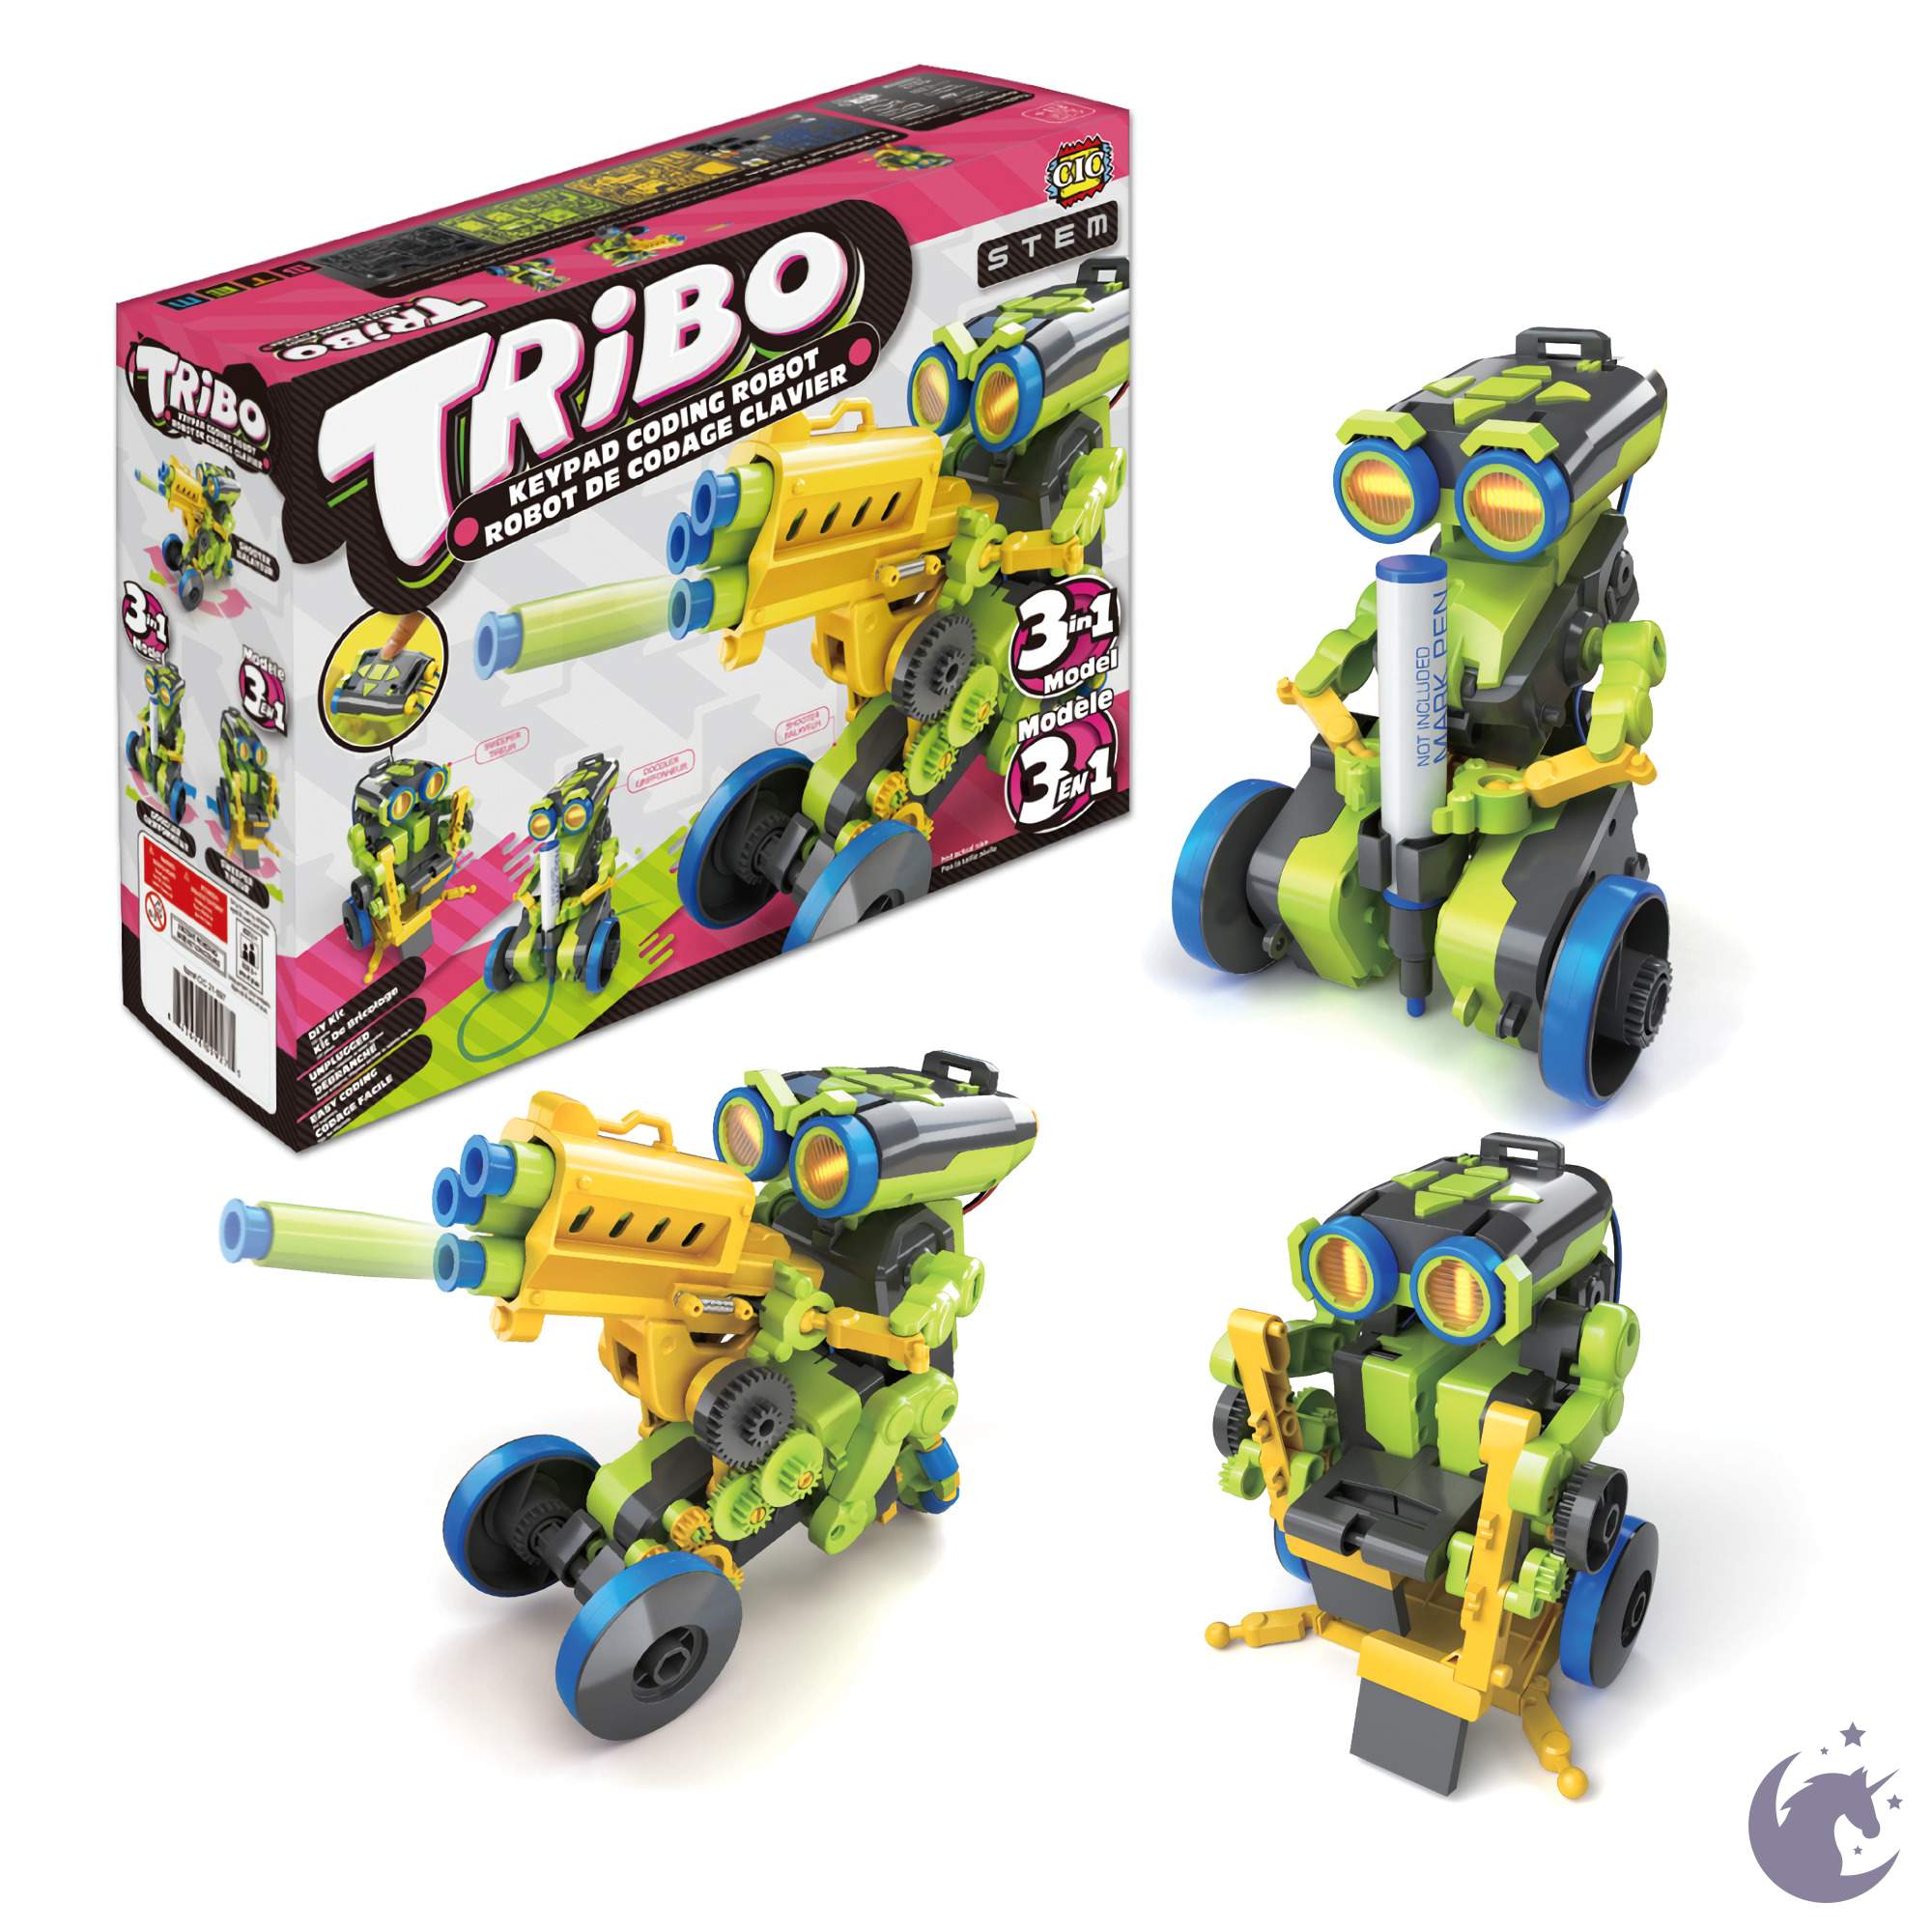 unicorntoys cic kits tribo 3 in 1 kepad coding educational robot engineering stem toys for teens CIC21-897